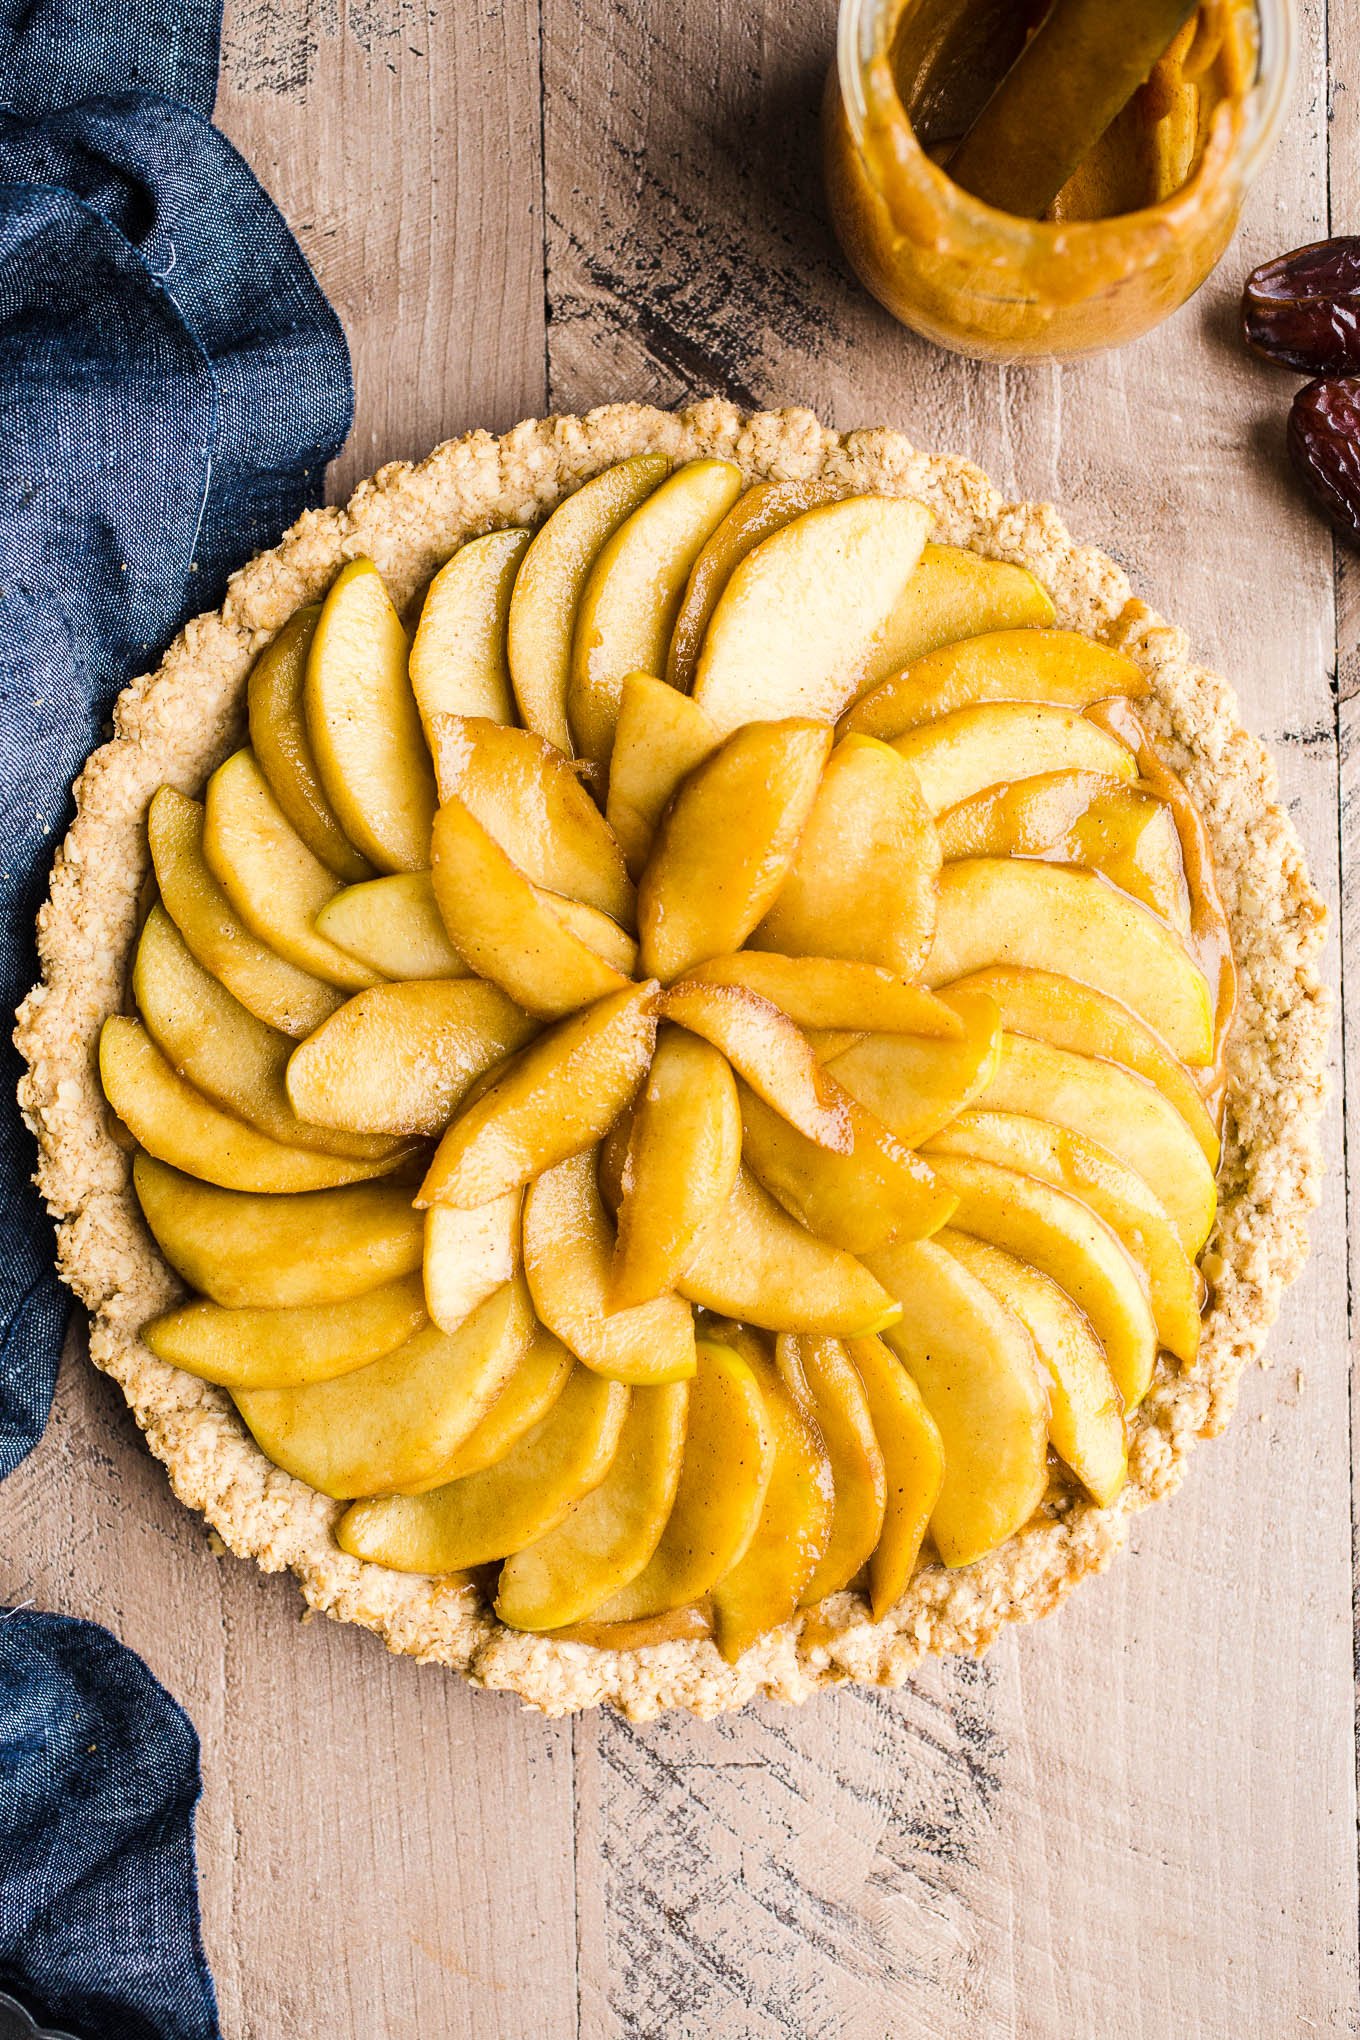 tart with sliced apples and caramel